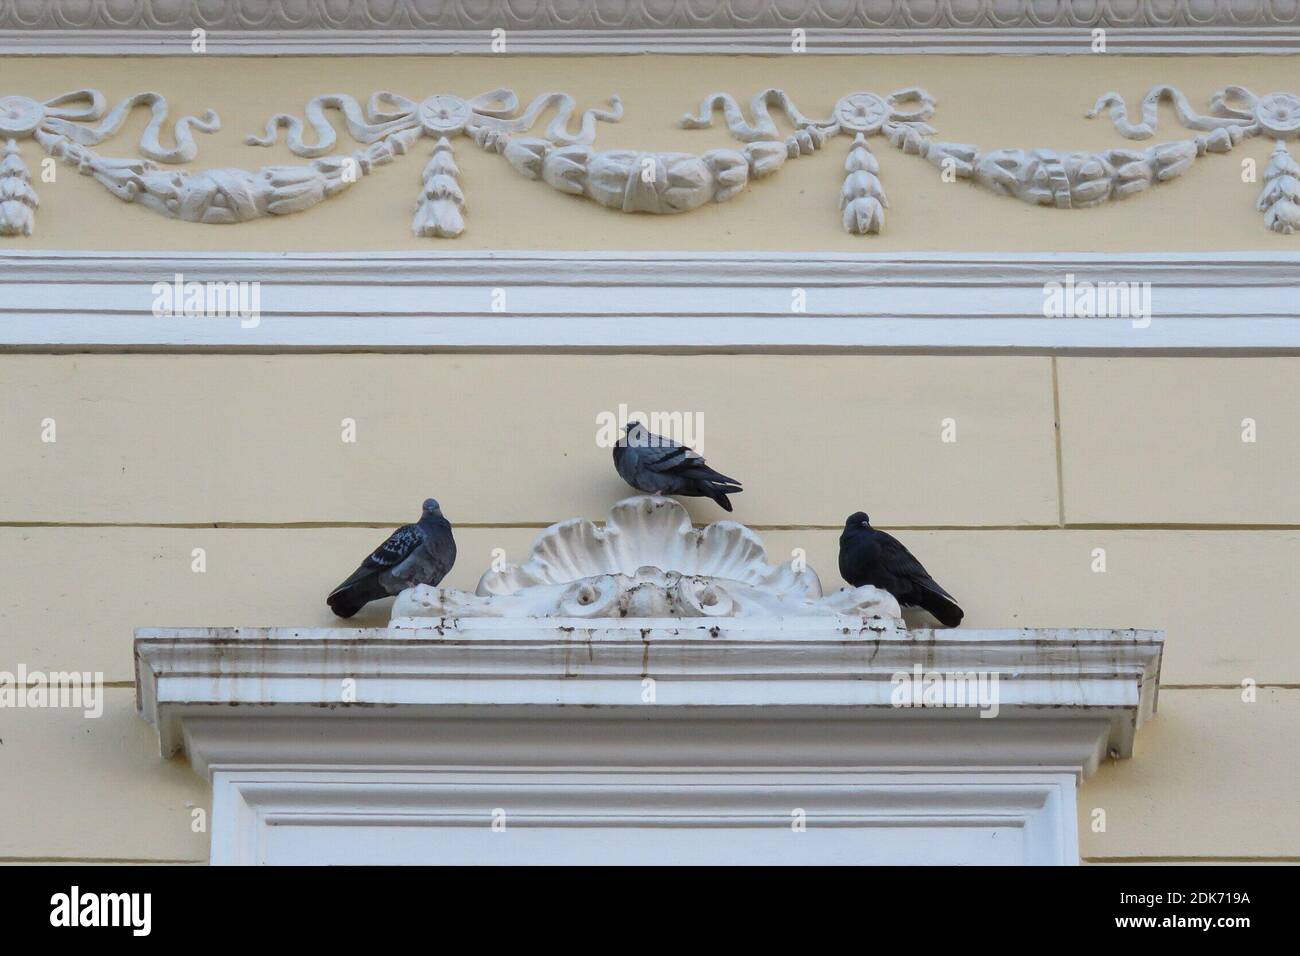 Low Angle View Of Pigeons Perching On Wall Stock Photo